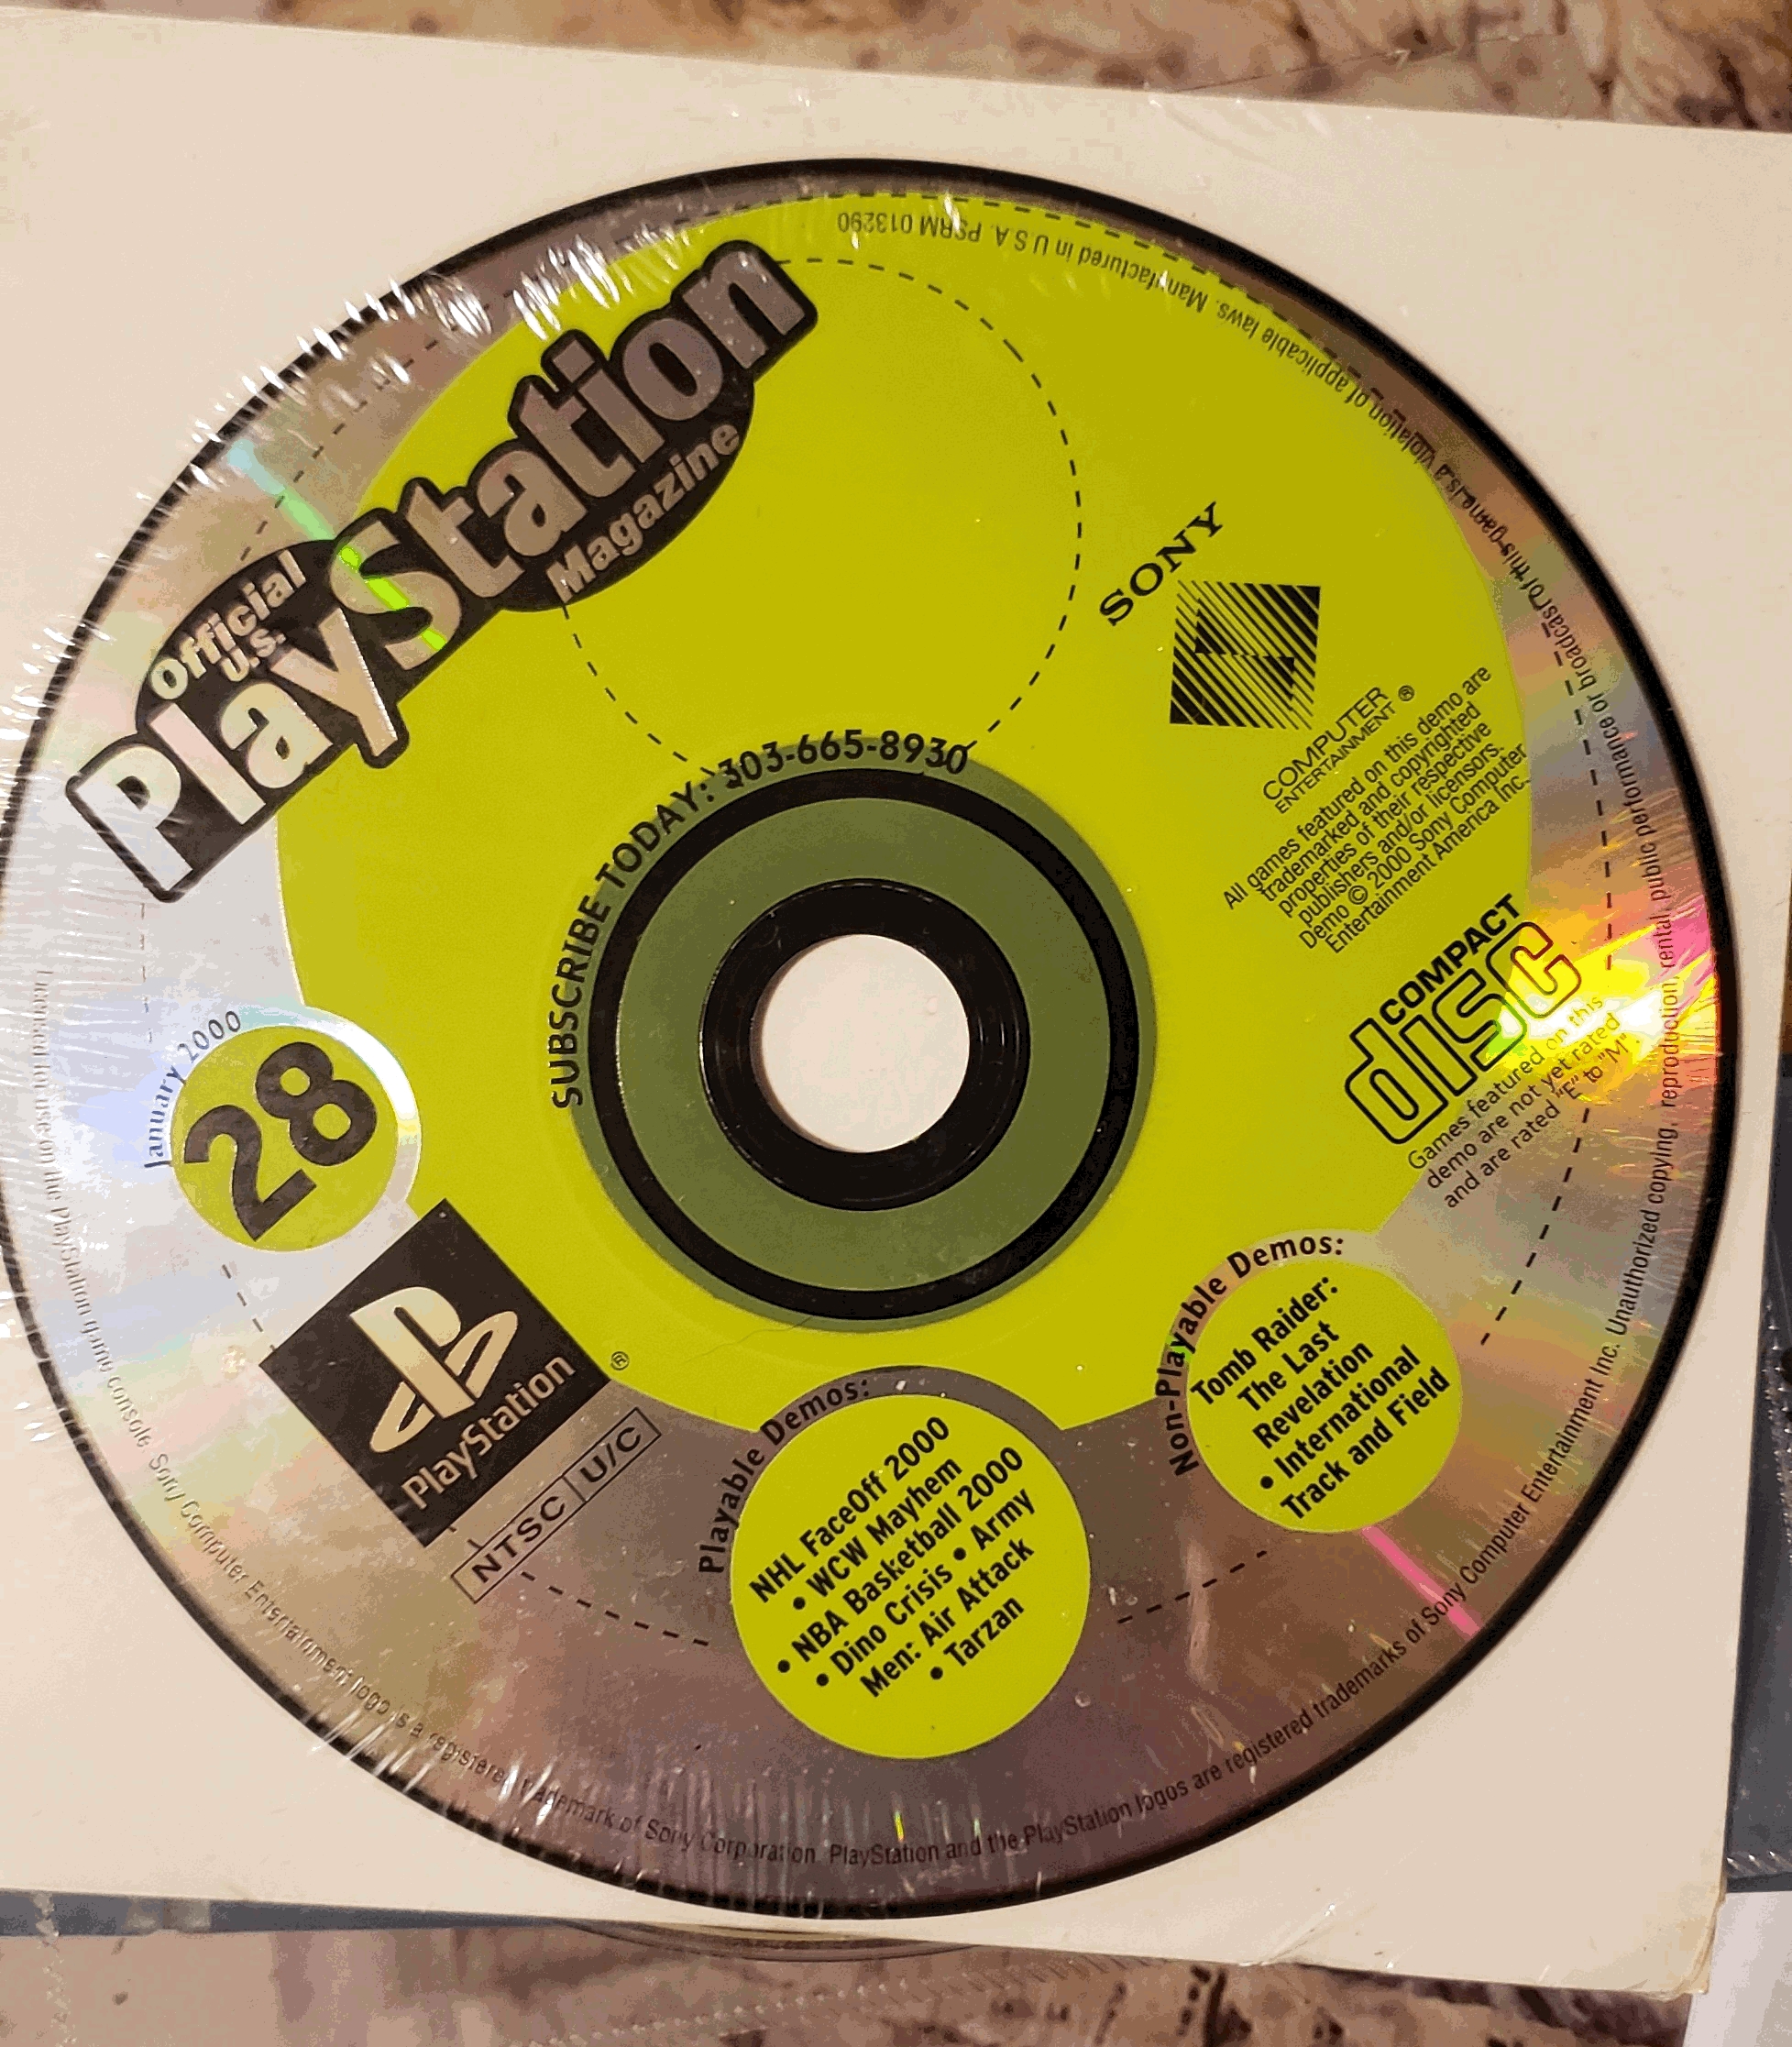 Press Play 1994 Uncharted sync issue! : r/playstationstars